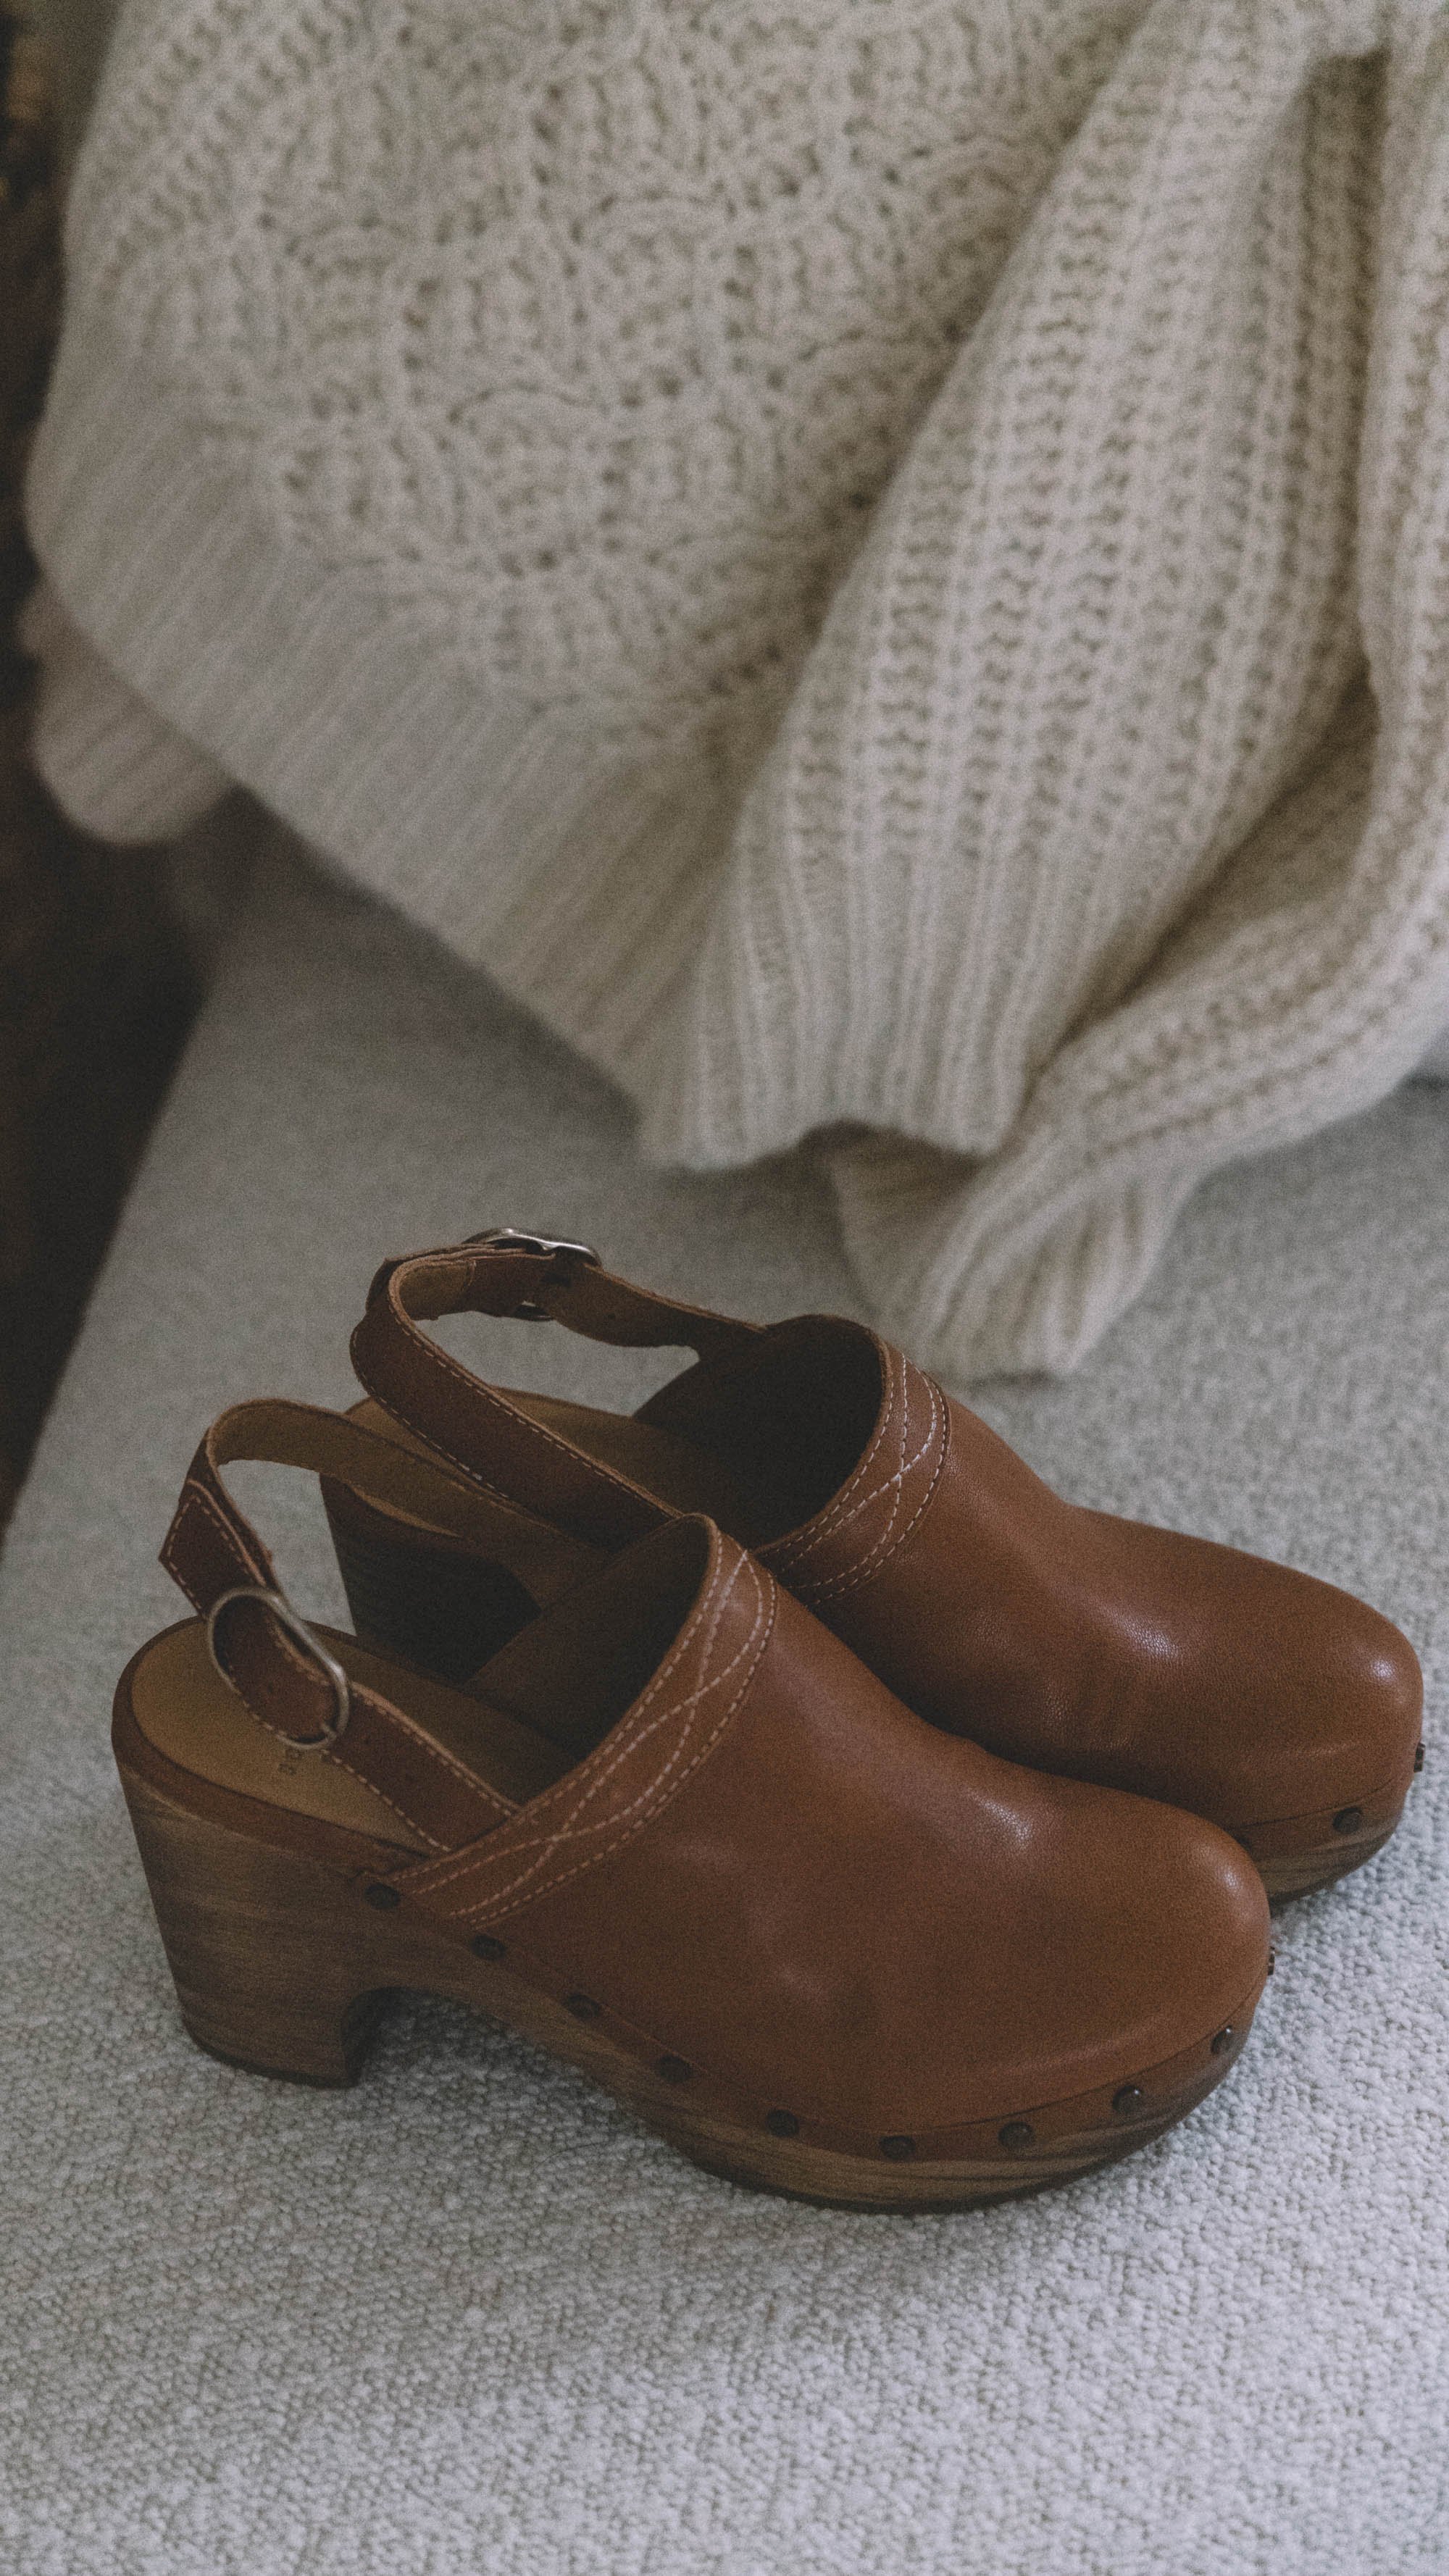 3 Warm Fall Outfits. @sarahchristine wearing cozy fall Sweater Outfit featuring Sezane TAYLOR smooth camel clogs -3.jpg